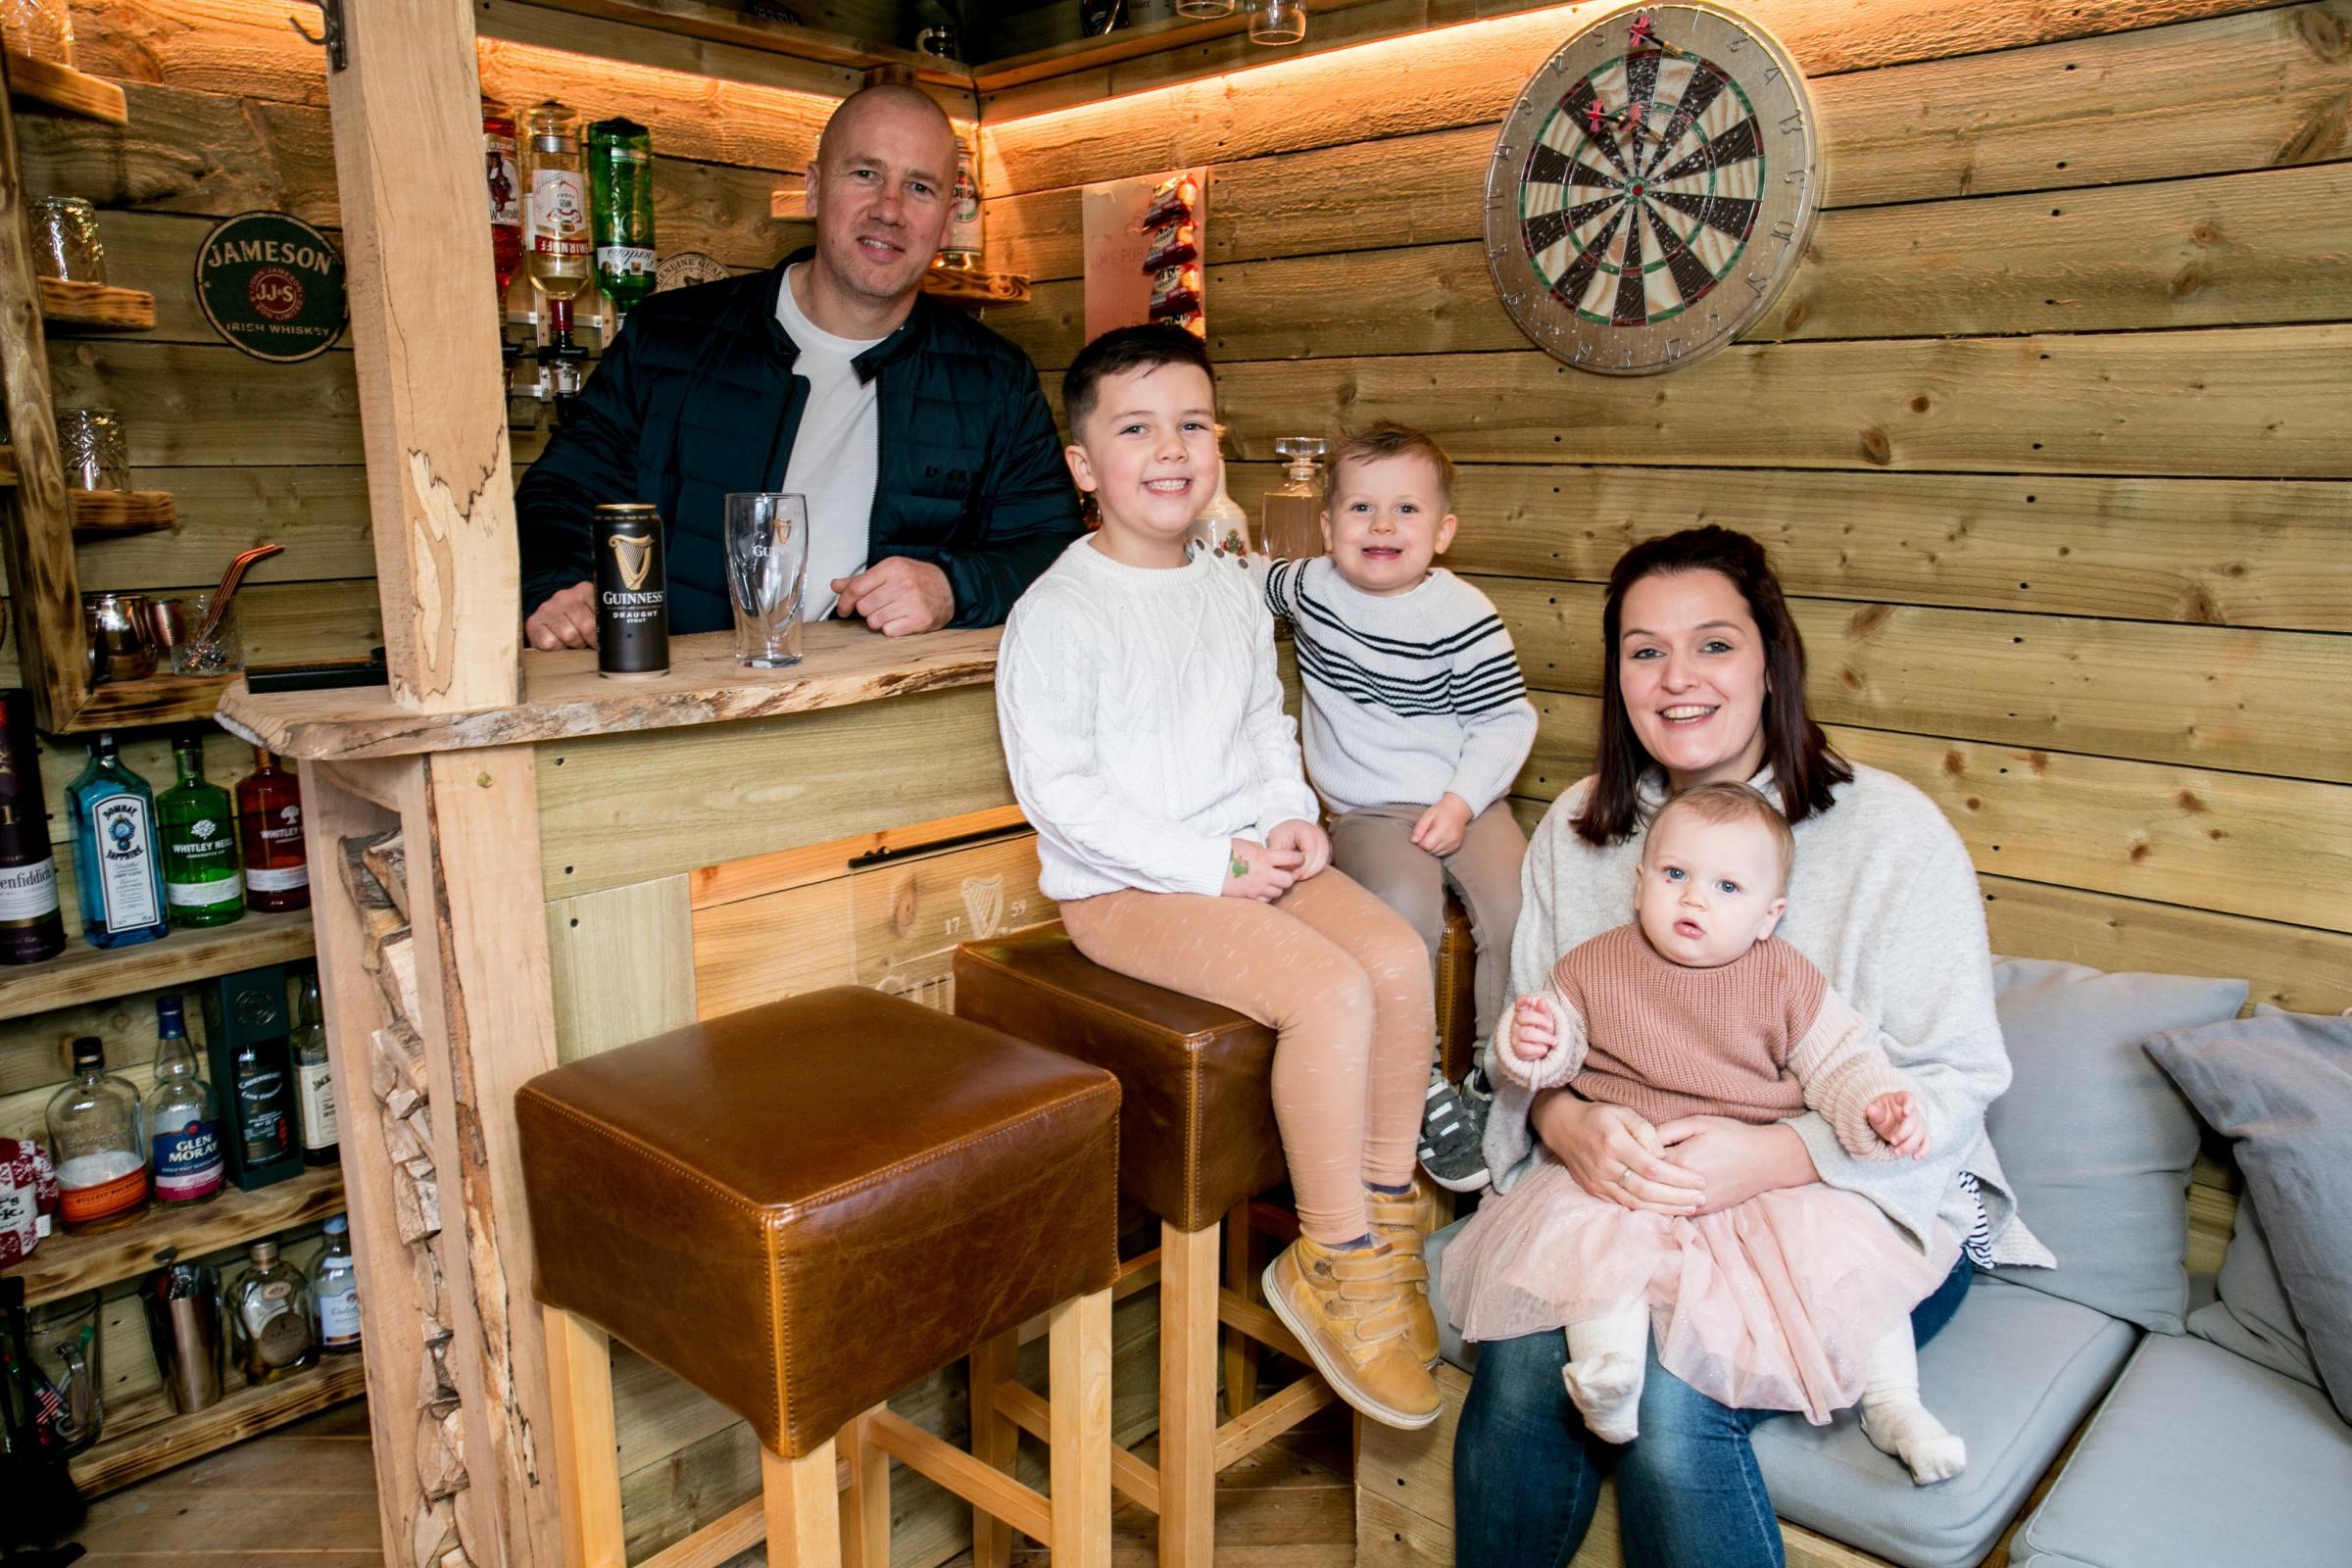 Shaun O’Sullivans shed came runner up in the Shed of the Year competition he is pictured with his family Alison, Orla 1, Jaxon 3 and Colby 5 Picture: SARAH CALDECOTT